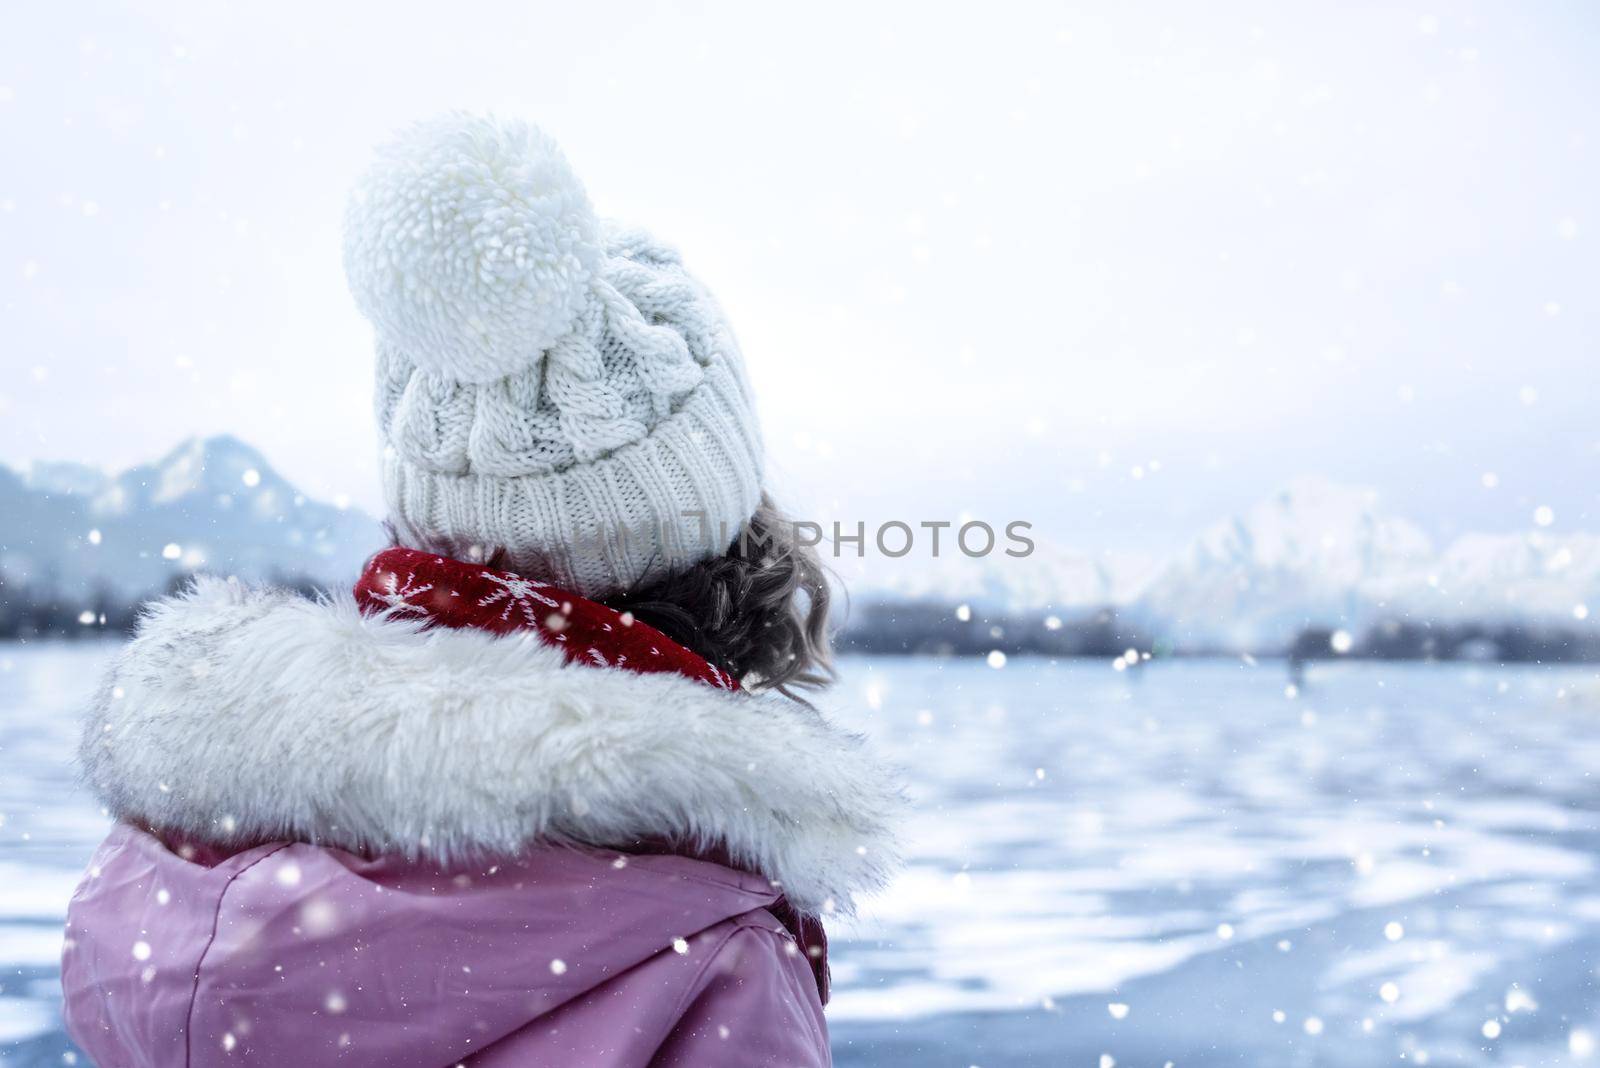 The charming Lady looks thoughtfully into the distance. She is dreaming about someone. The ice in the frozen lake shifting and make amazing noises. The acoustics of the frozen lake creates a dream